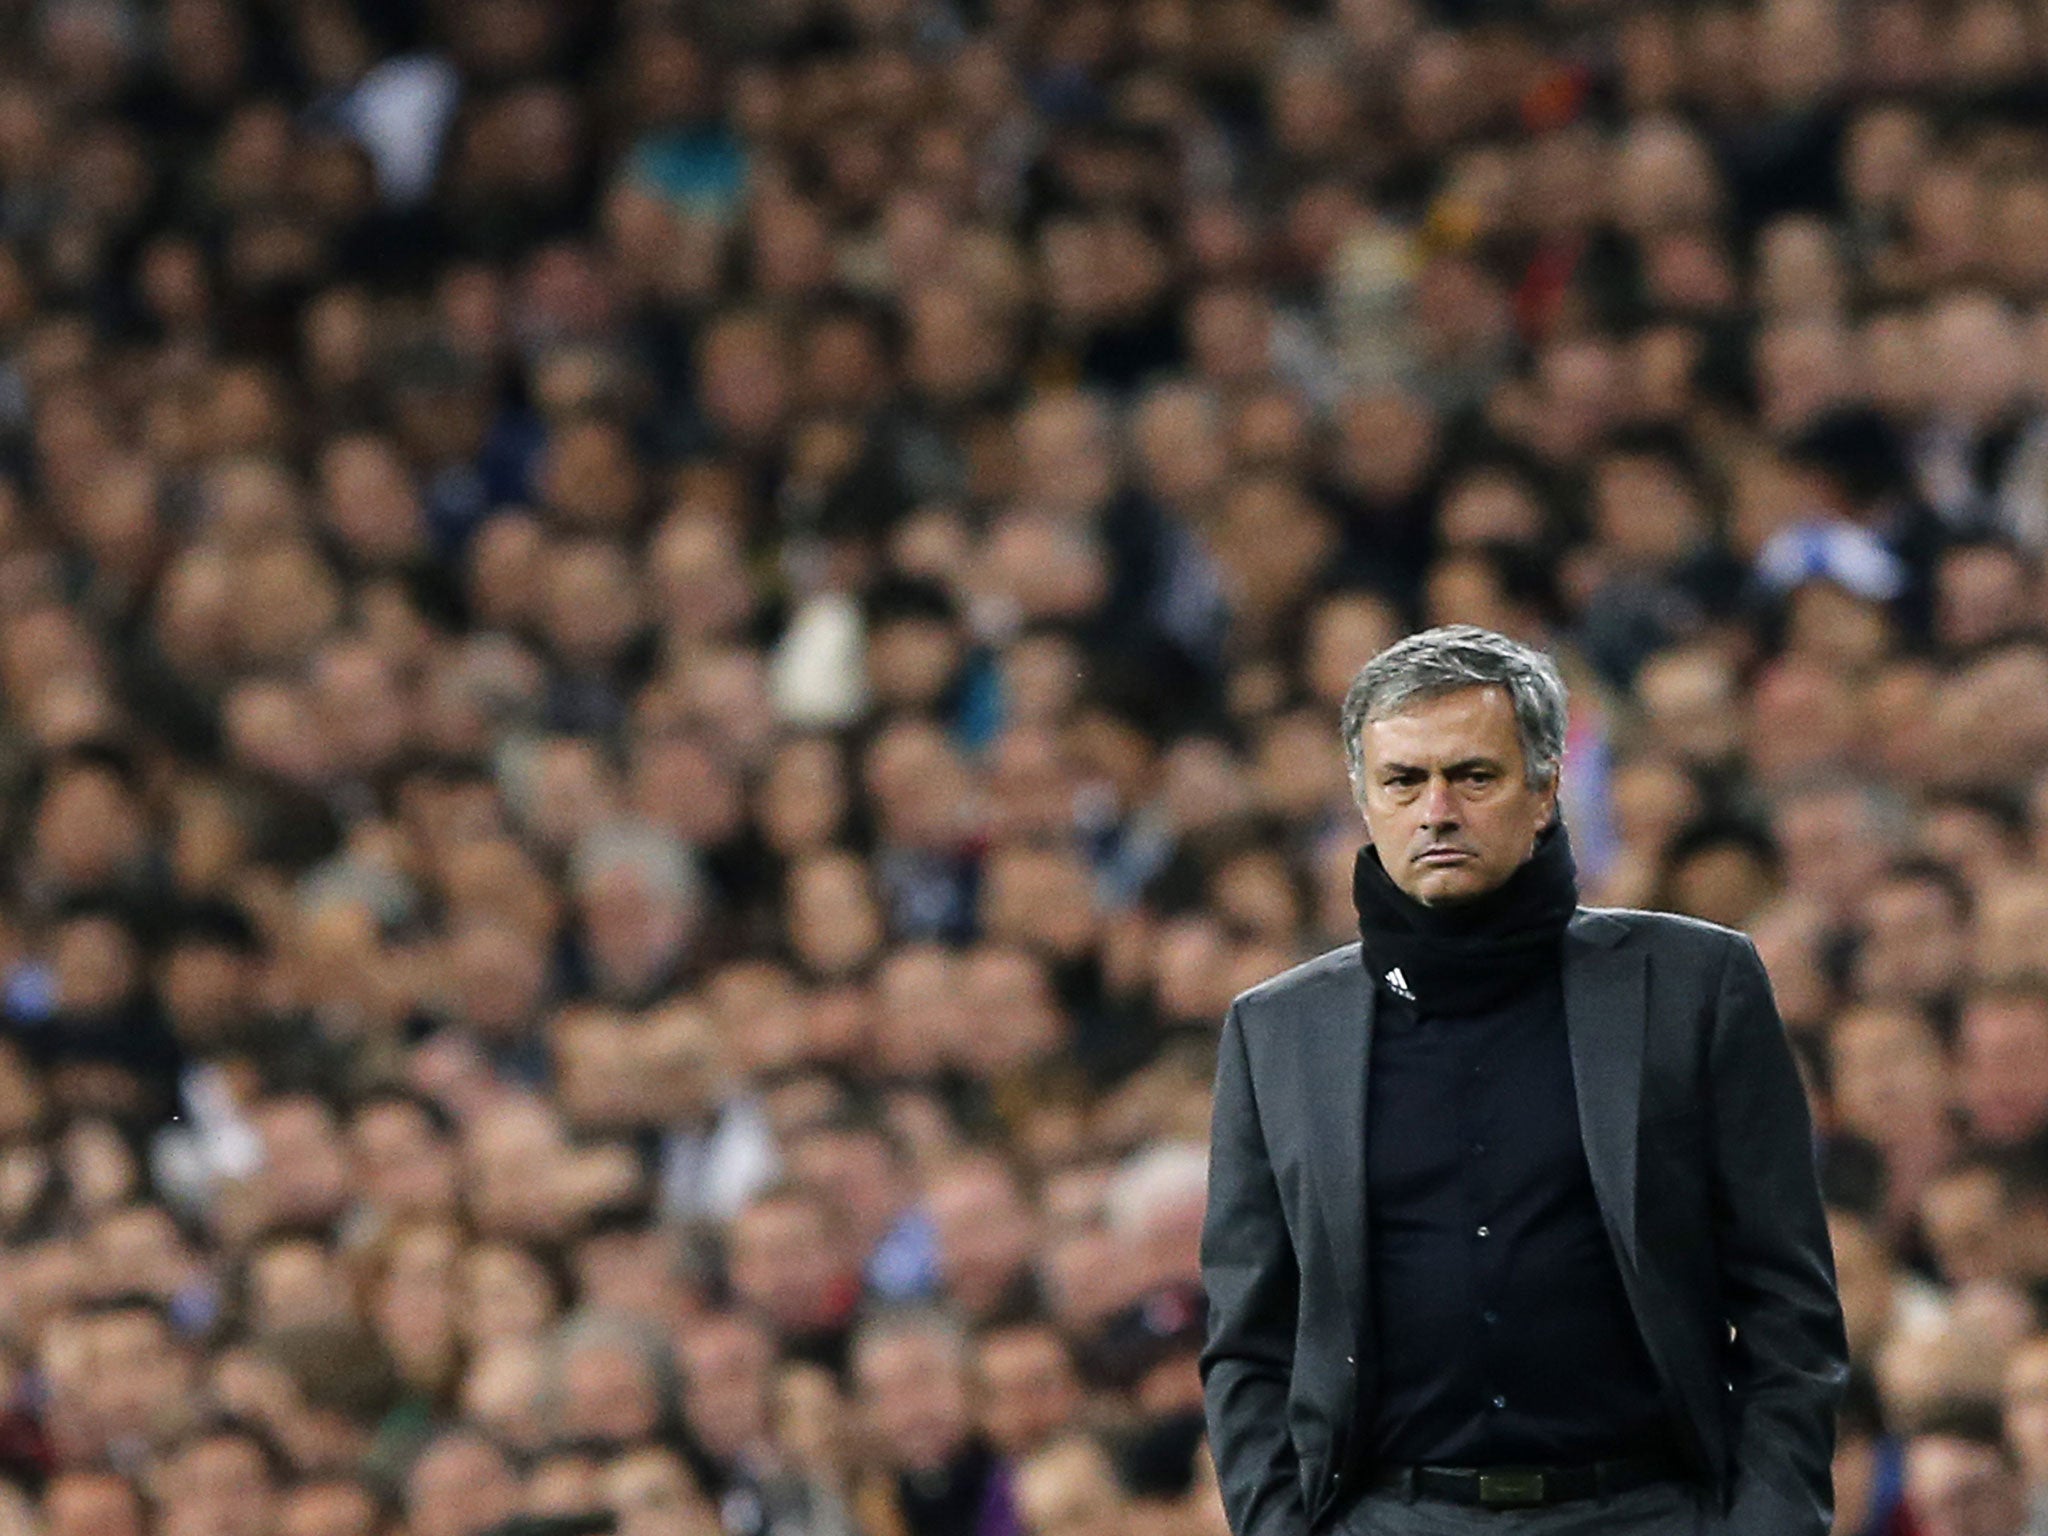 Jose Mourinho insists he is not under pressure despite last night's 1-1 Champions League draw between Real Madrid and Manchester United